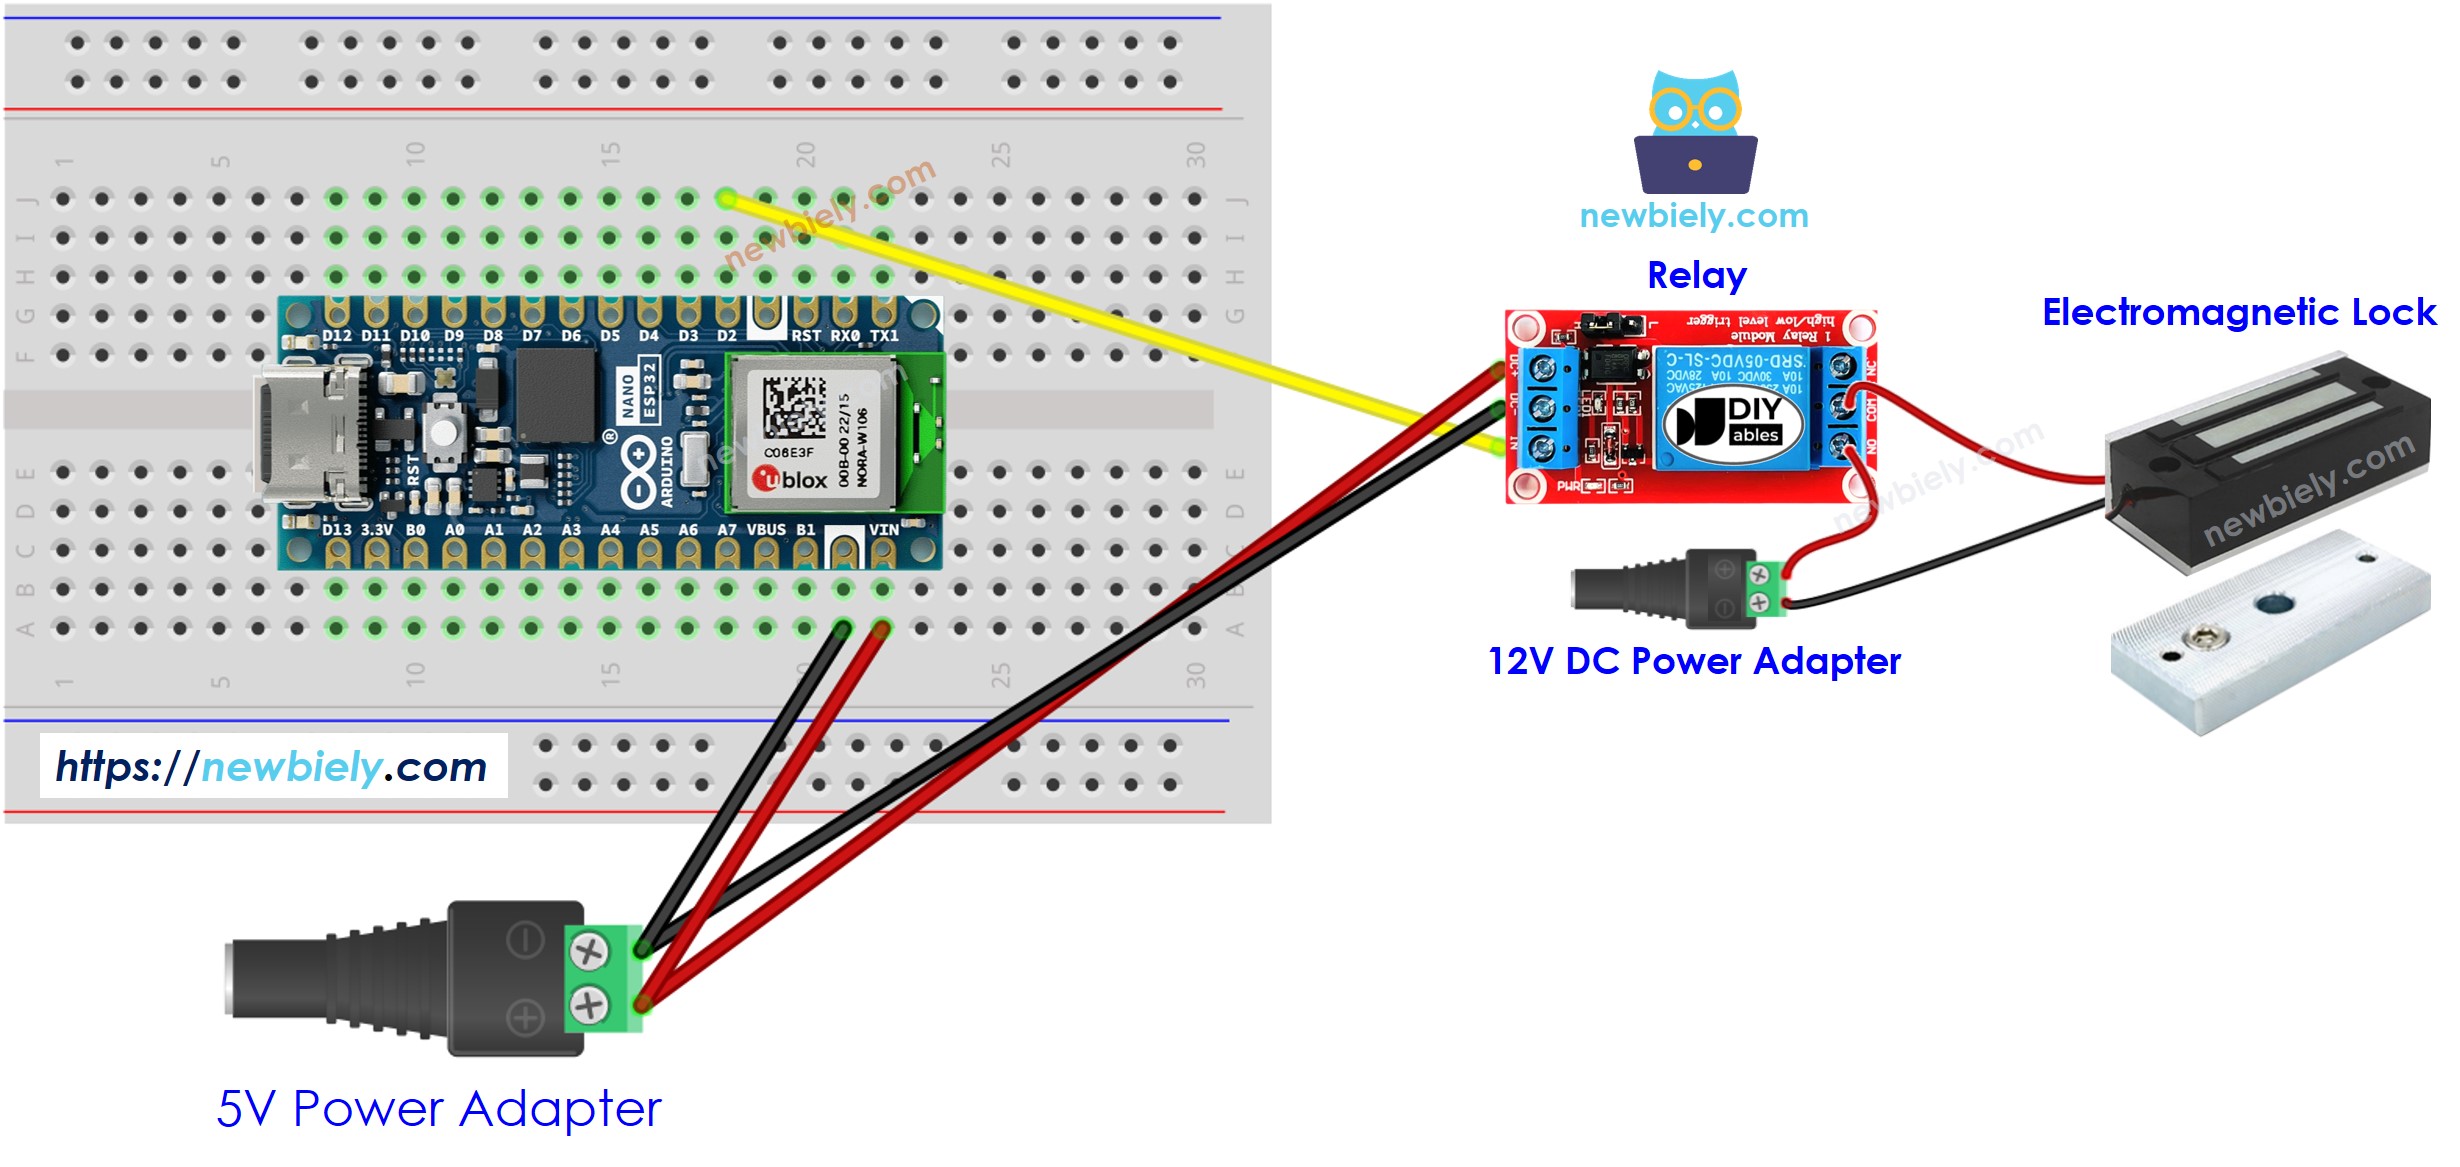 The wiring diagram between Arduino Nano ESP32 and Electromagnetic Lock